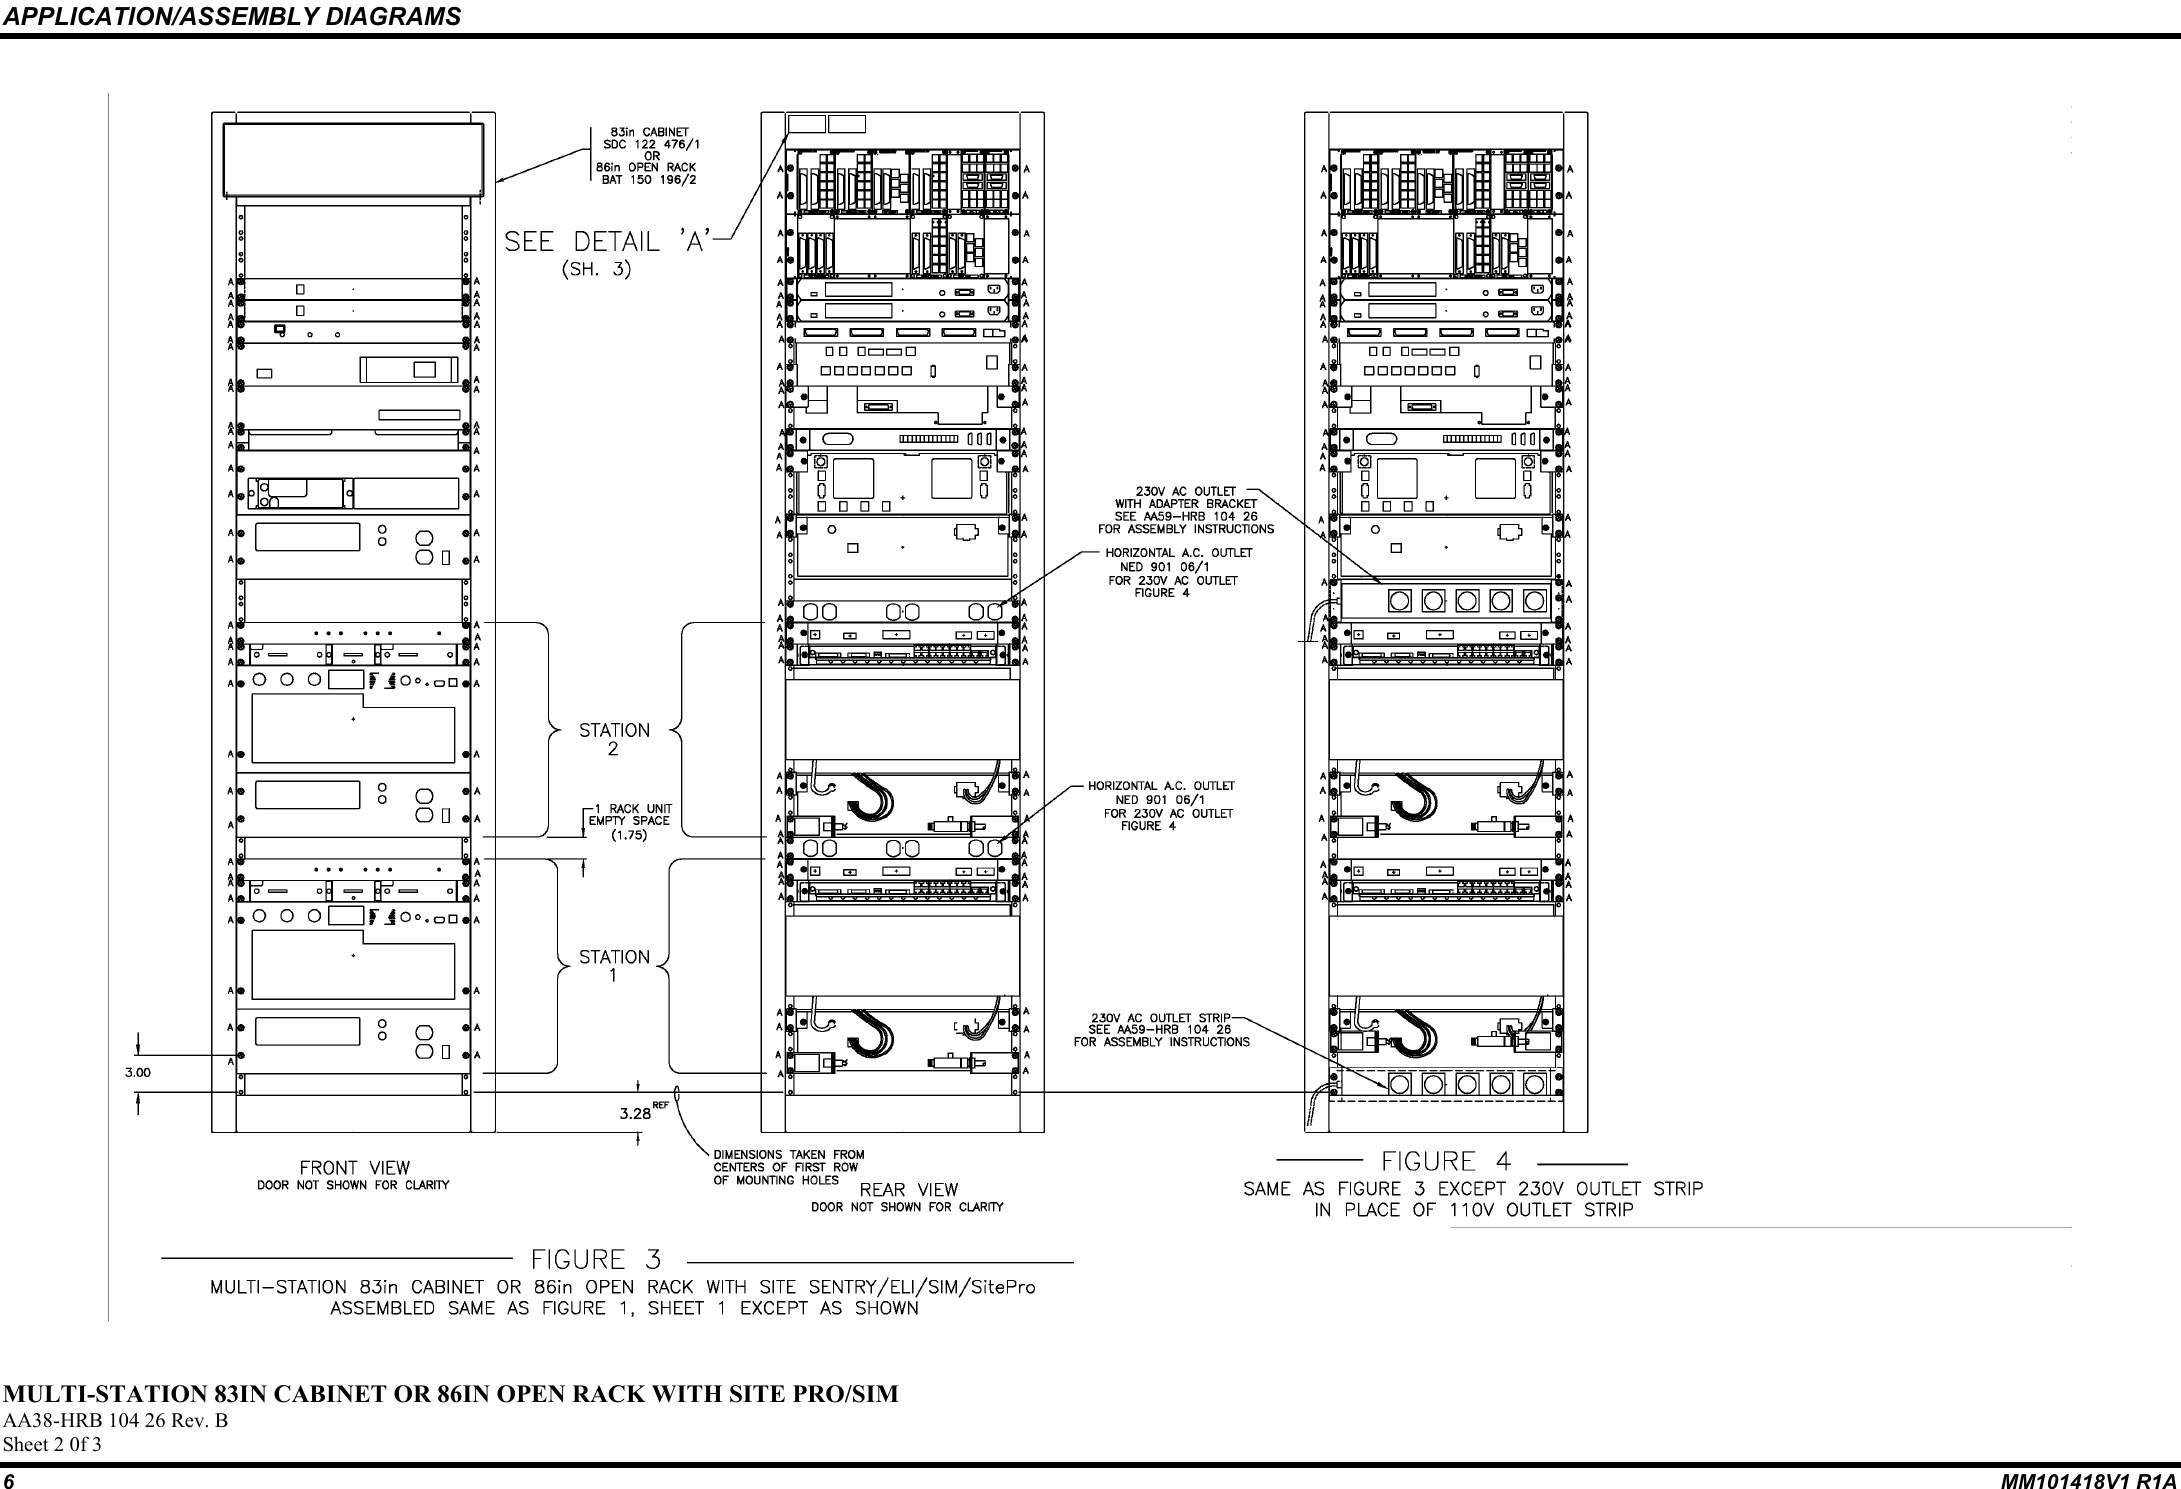 APPLICATION/ASSEMBLY DIAGRAMS6MM101418V1 R1AMULTI-STATION 83IN CABINET OR 86IN OPEN RACK WITH SITE PRO/SIMAA38-HRB 104 26 Rev. BSheet 2 0f 3